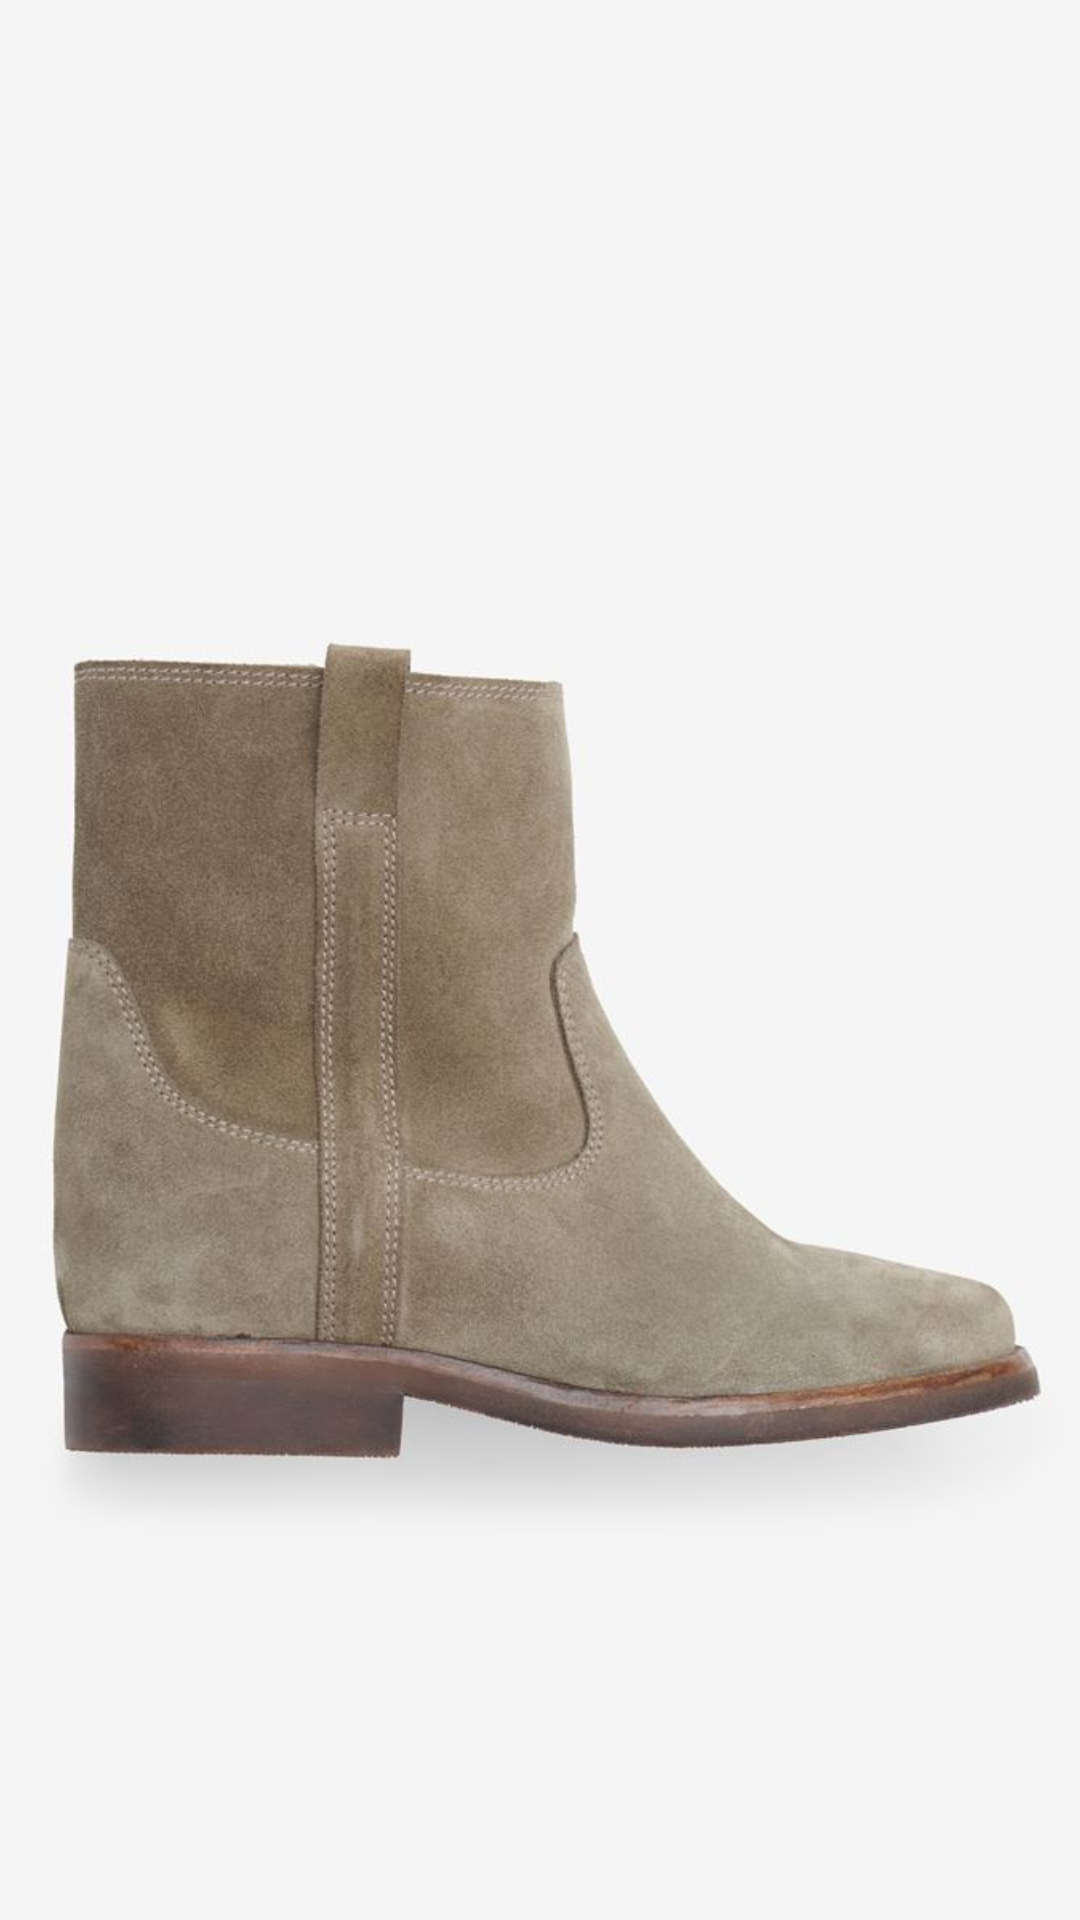 Susee Suede Camarguai Boot